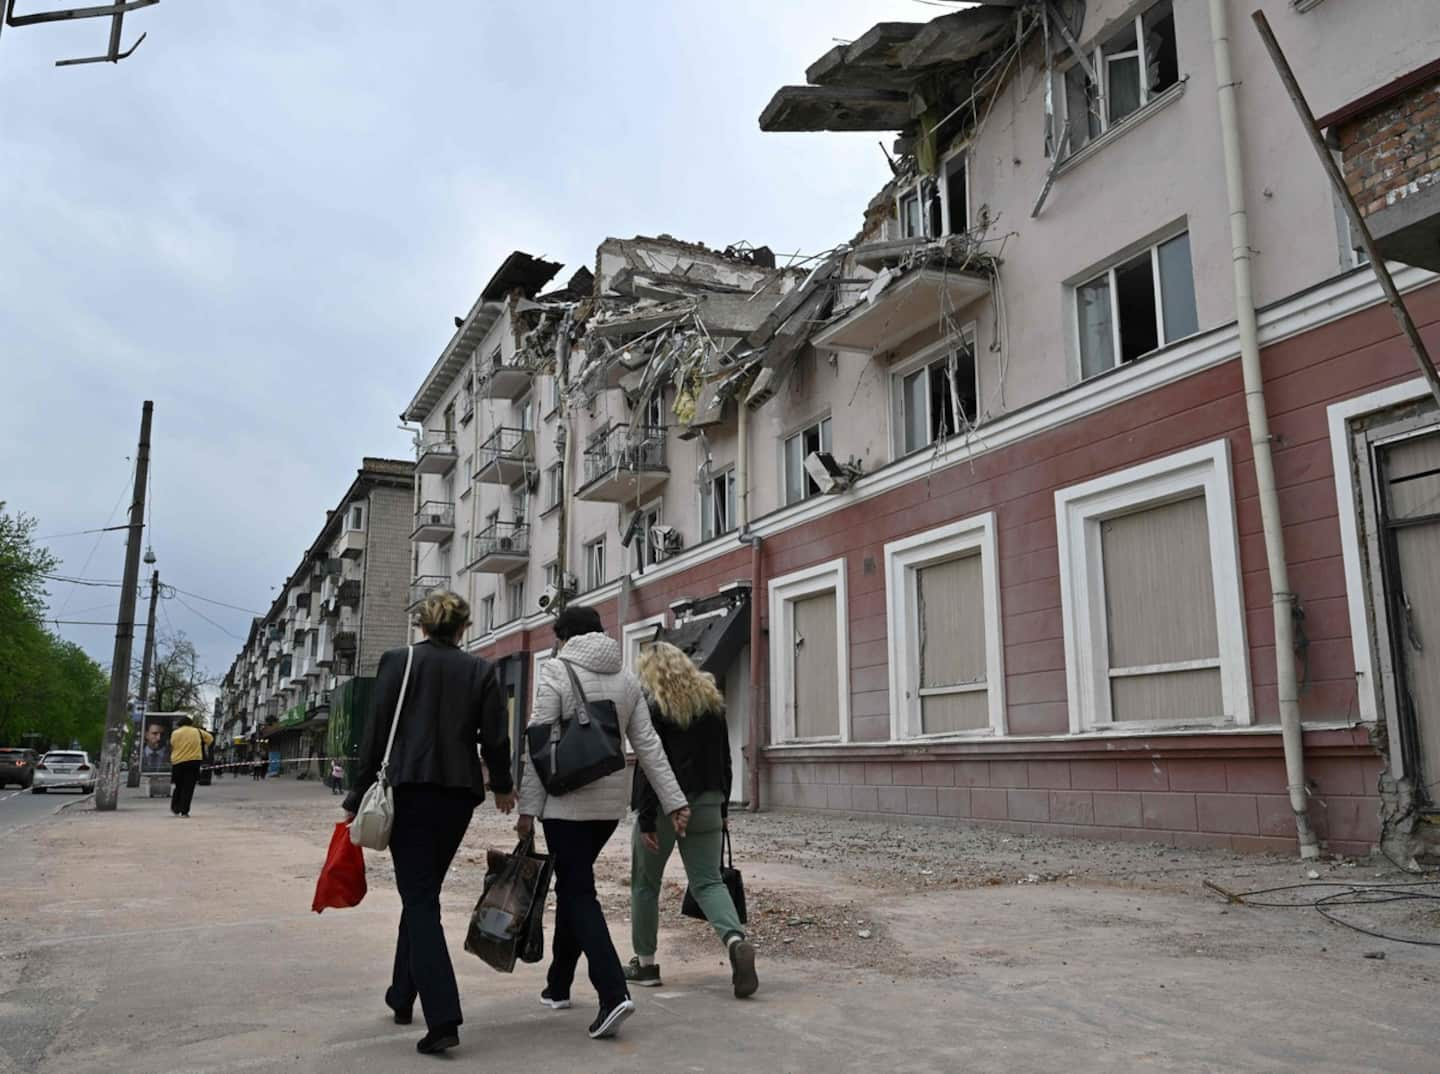 Rebuilding Ukraine will cost $750 billion and will be the business of all democracies